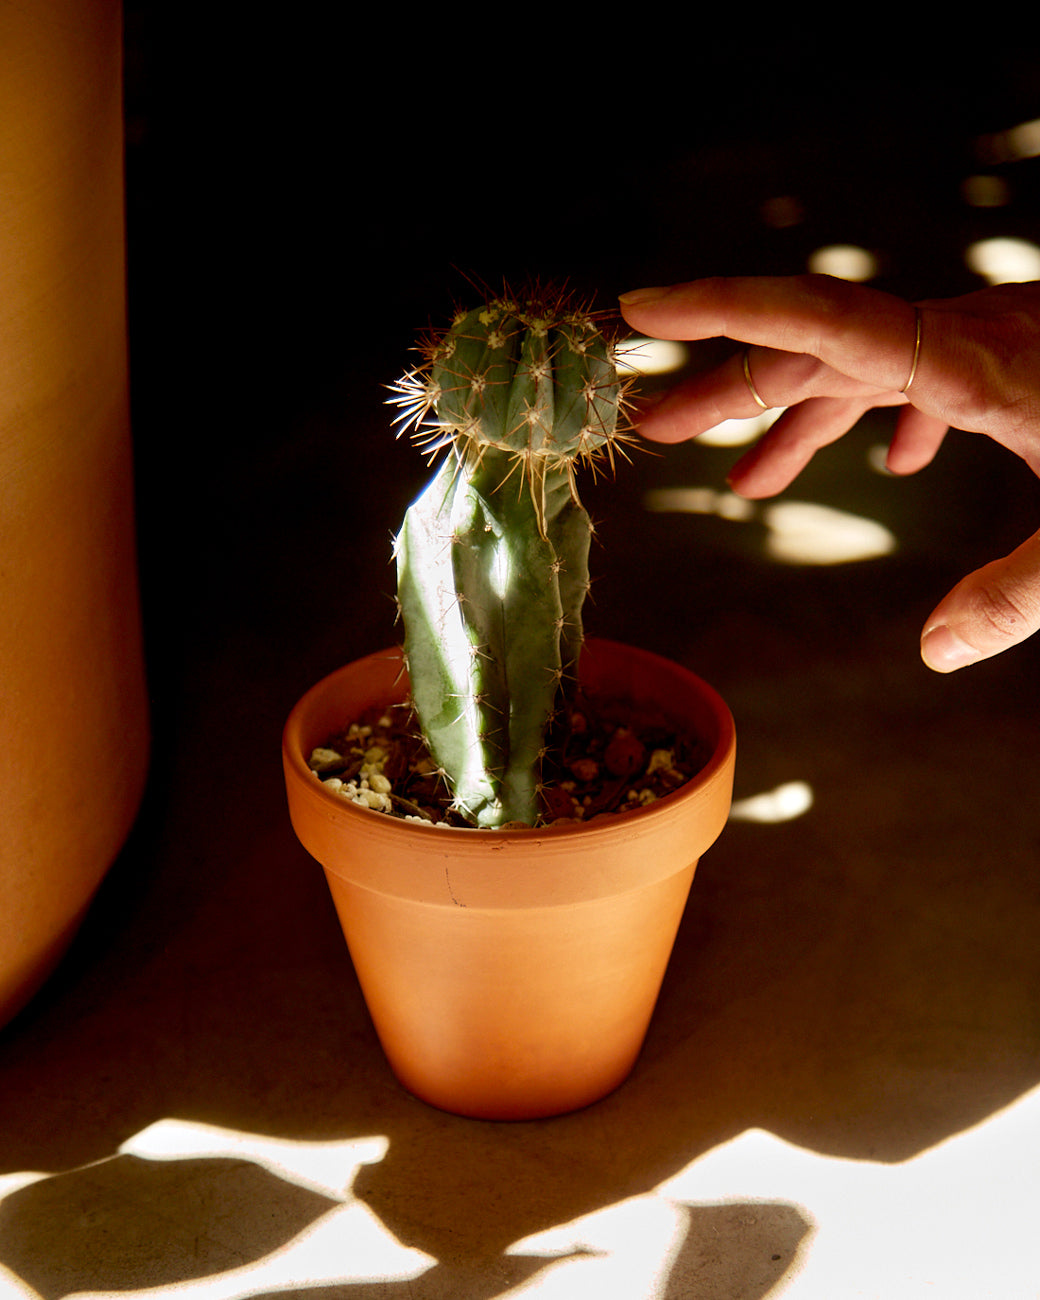 An employee reaches for a grafted cactus at Tula Plants & Design in Brooklyn.